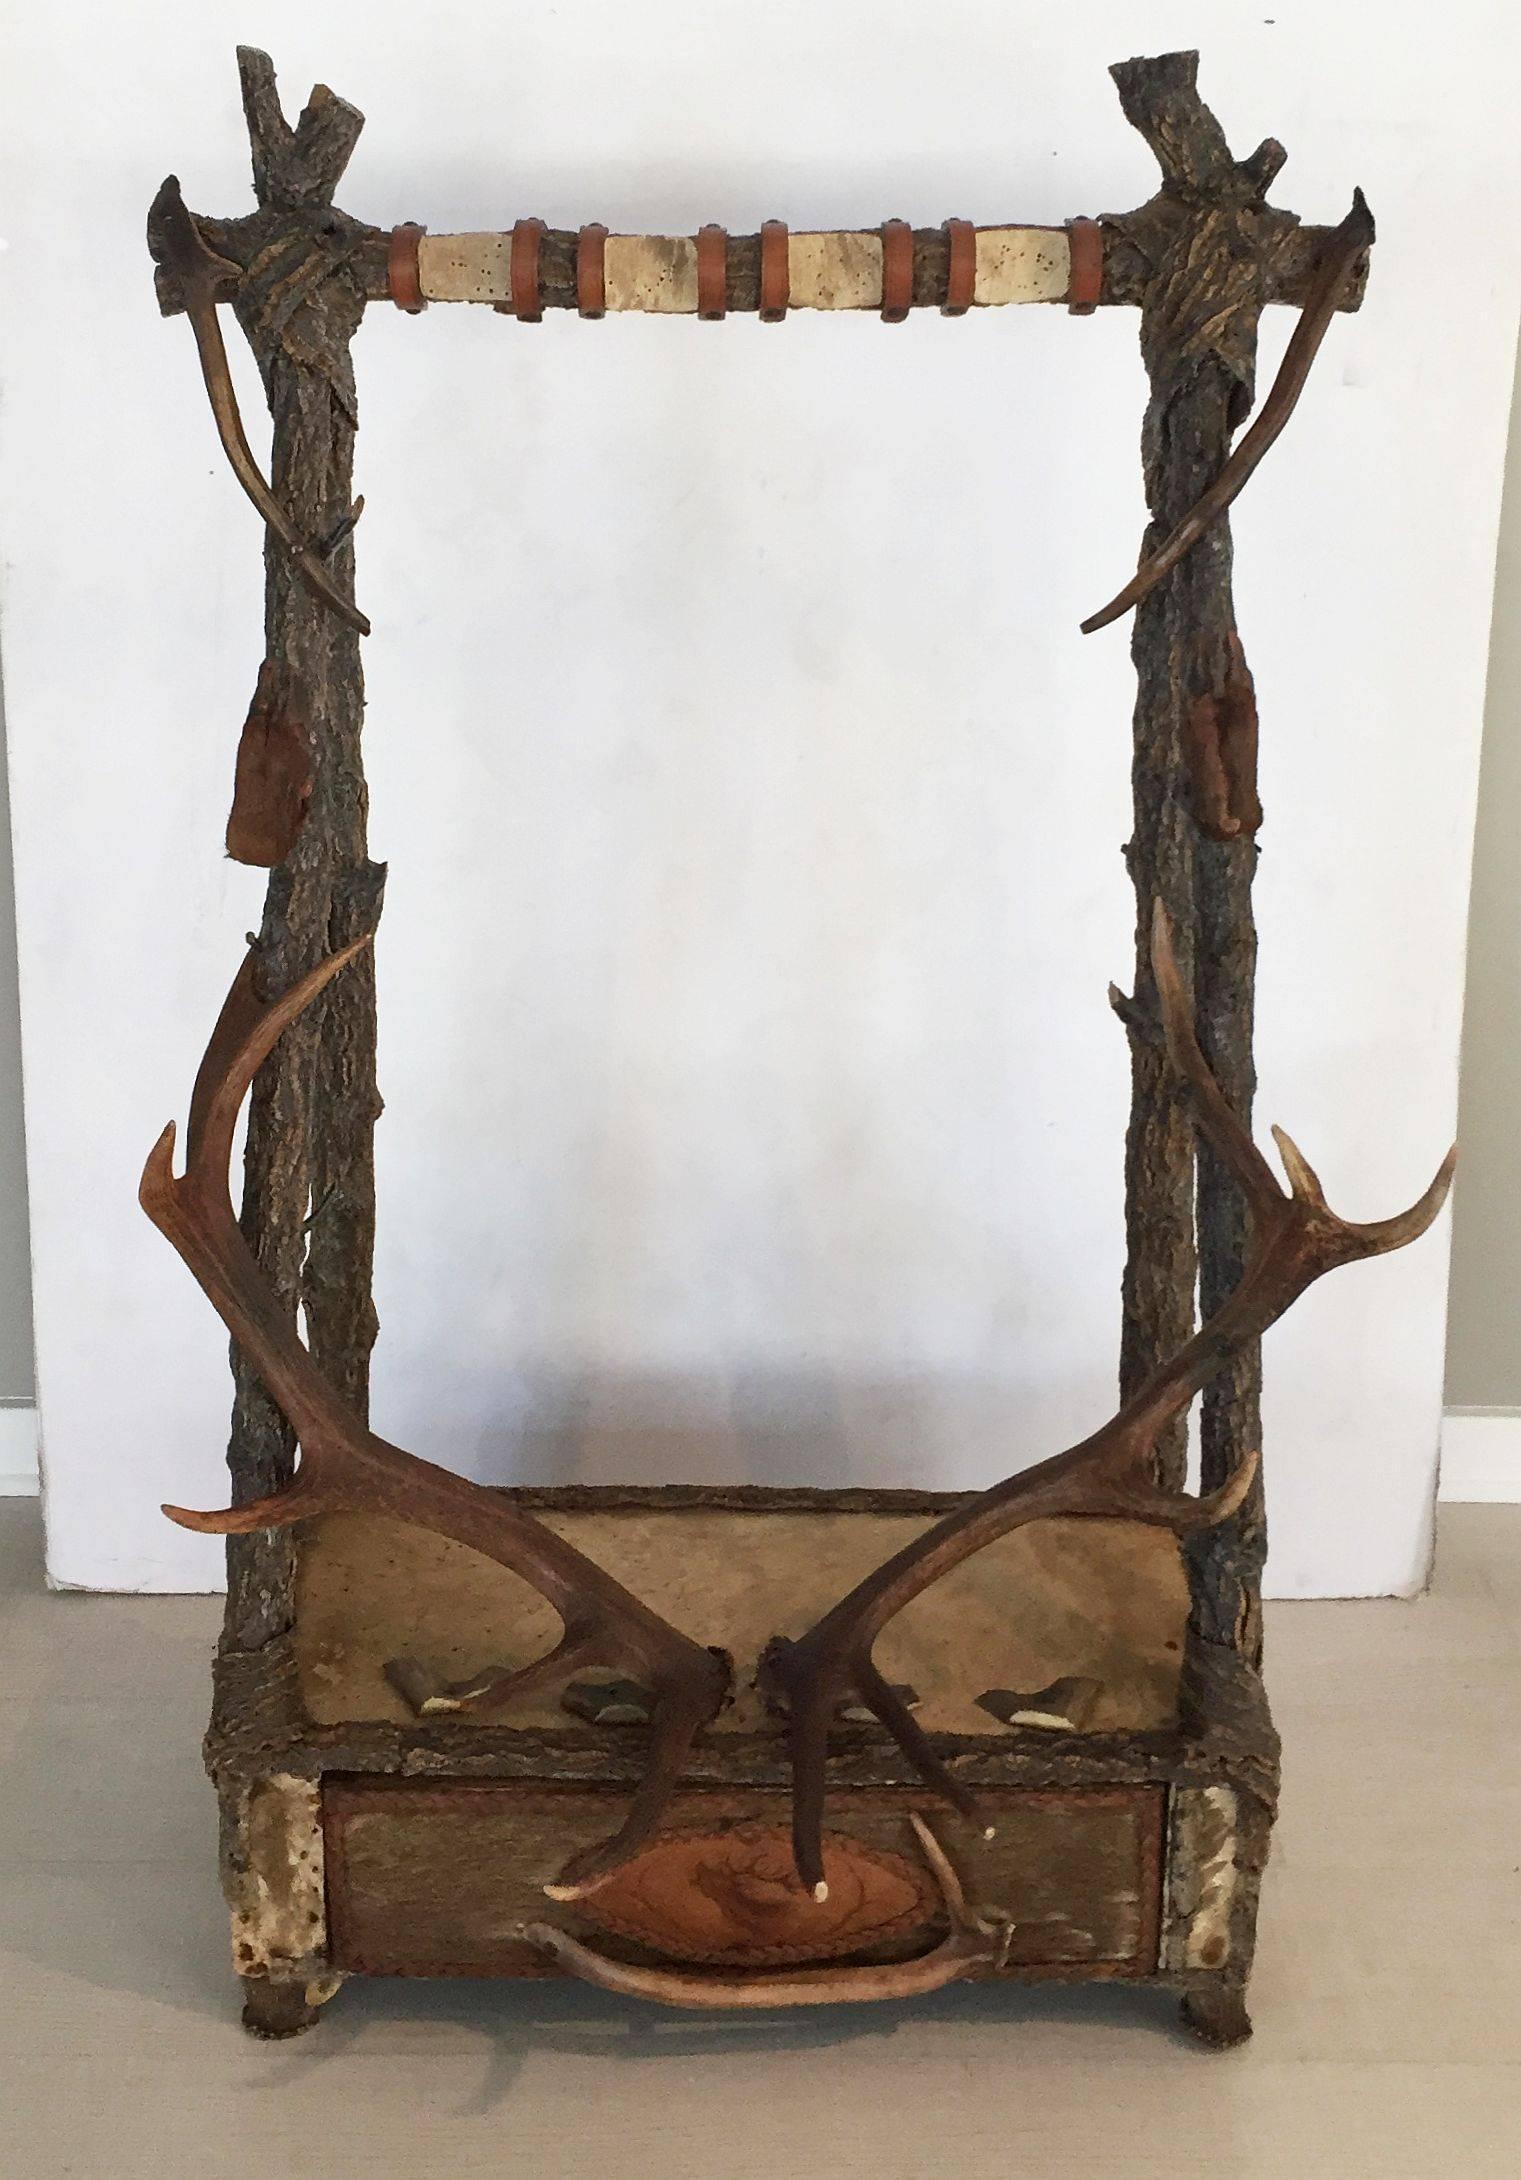 A fine Italian hunter's standing gun rack of antler horn, cork wood, hide and leather with storage drawer at base.